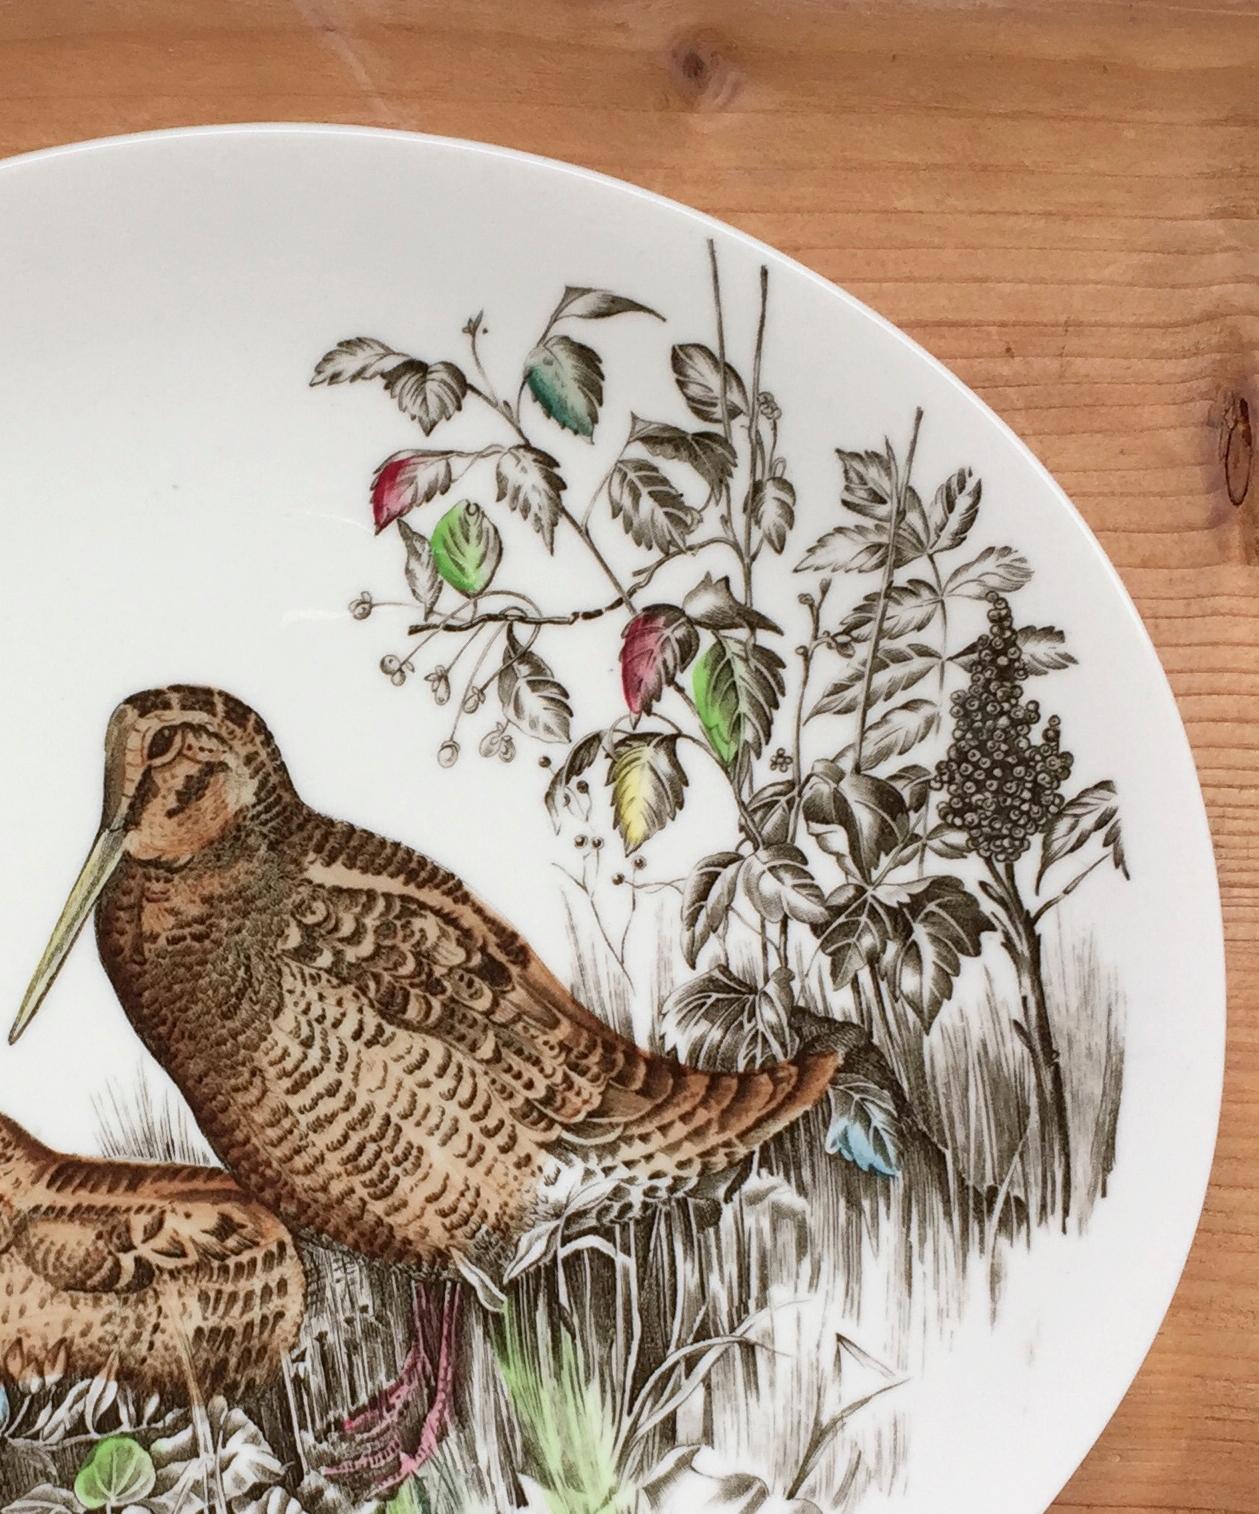 Fantastic oval porcelain English plate with woodcock painted by hand.
From the early 1960s
Johnson Brothers has been producing beautiful tableware since 1883.
The Game Birds were produced from 1953-1976, and the plate that we are offering must be